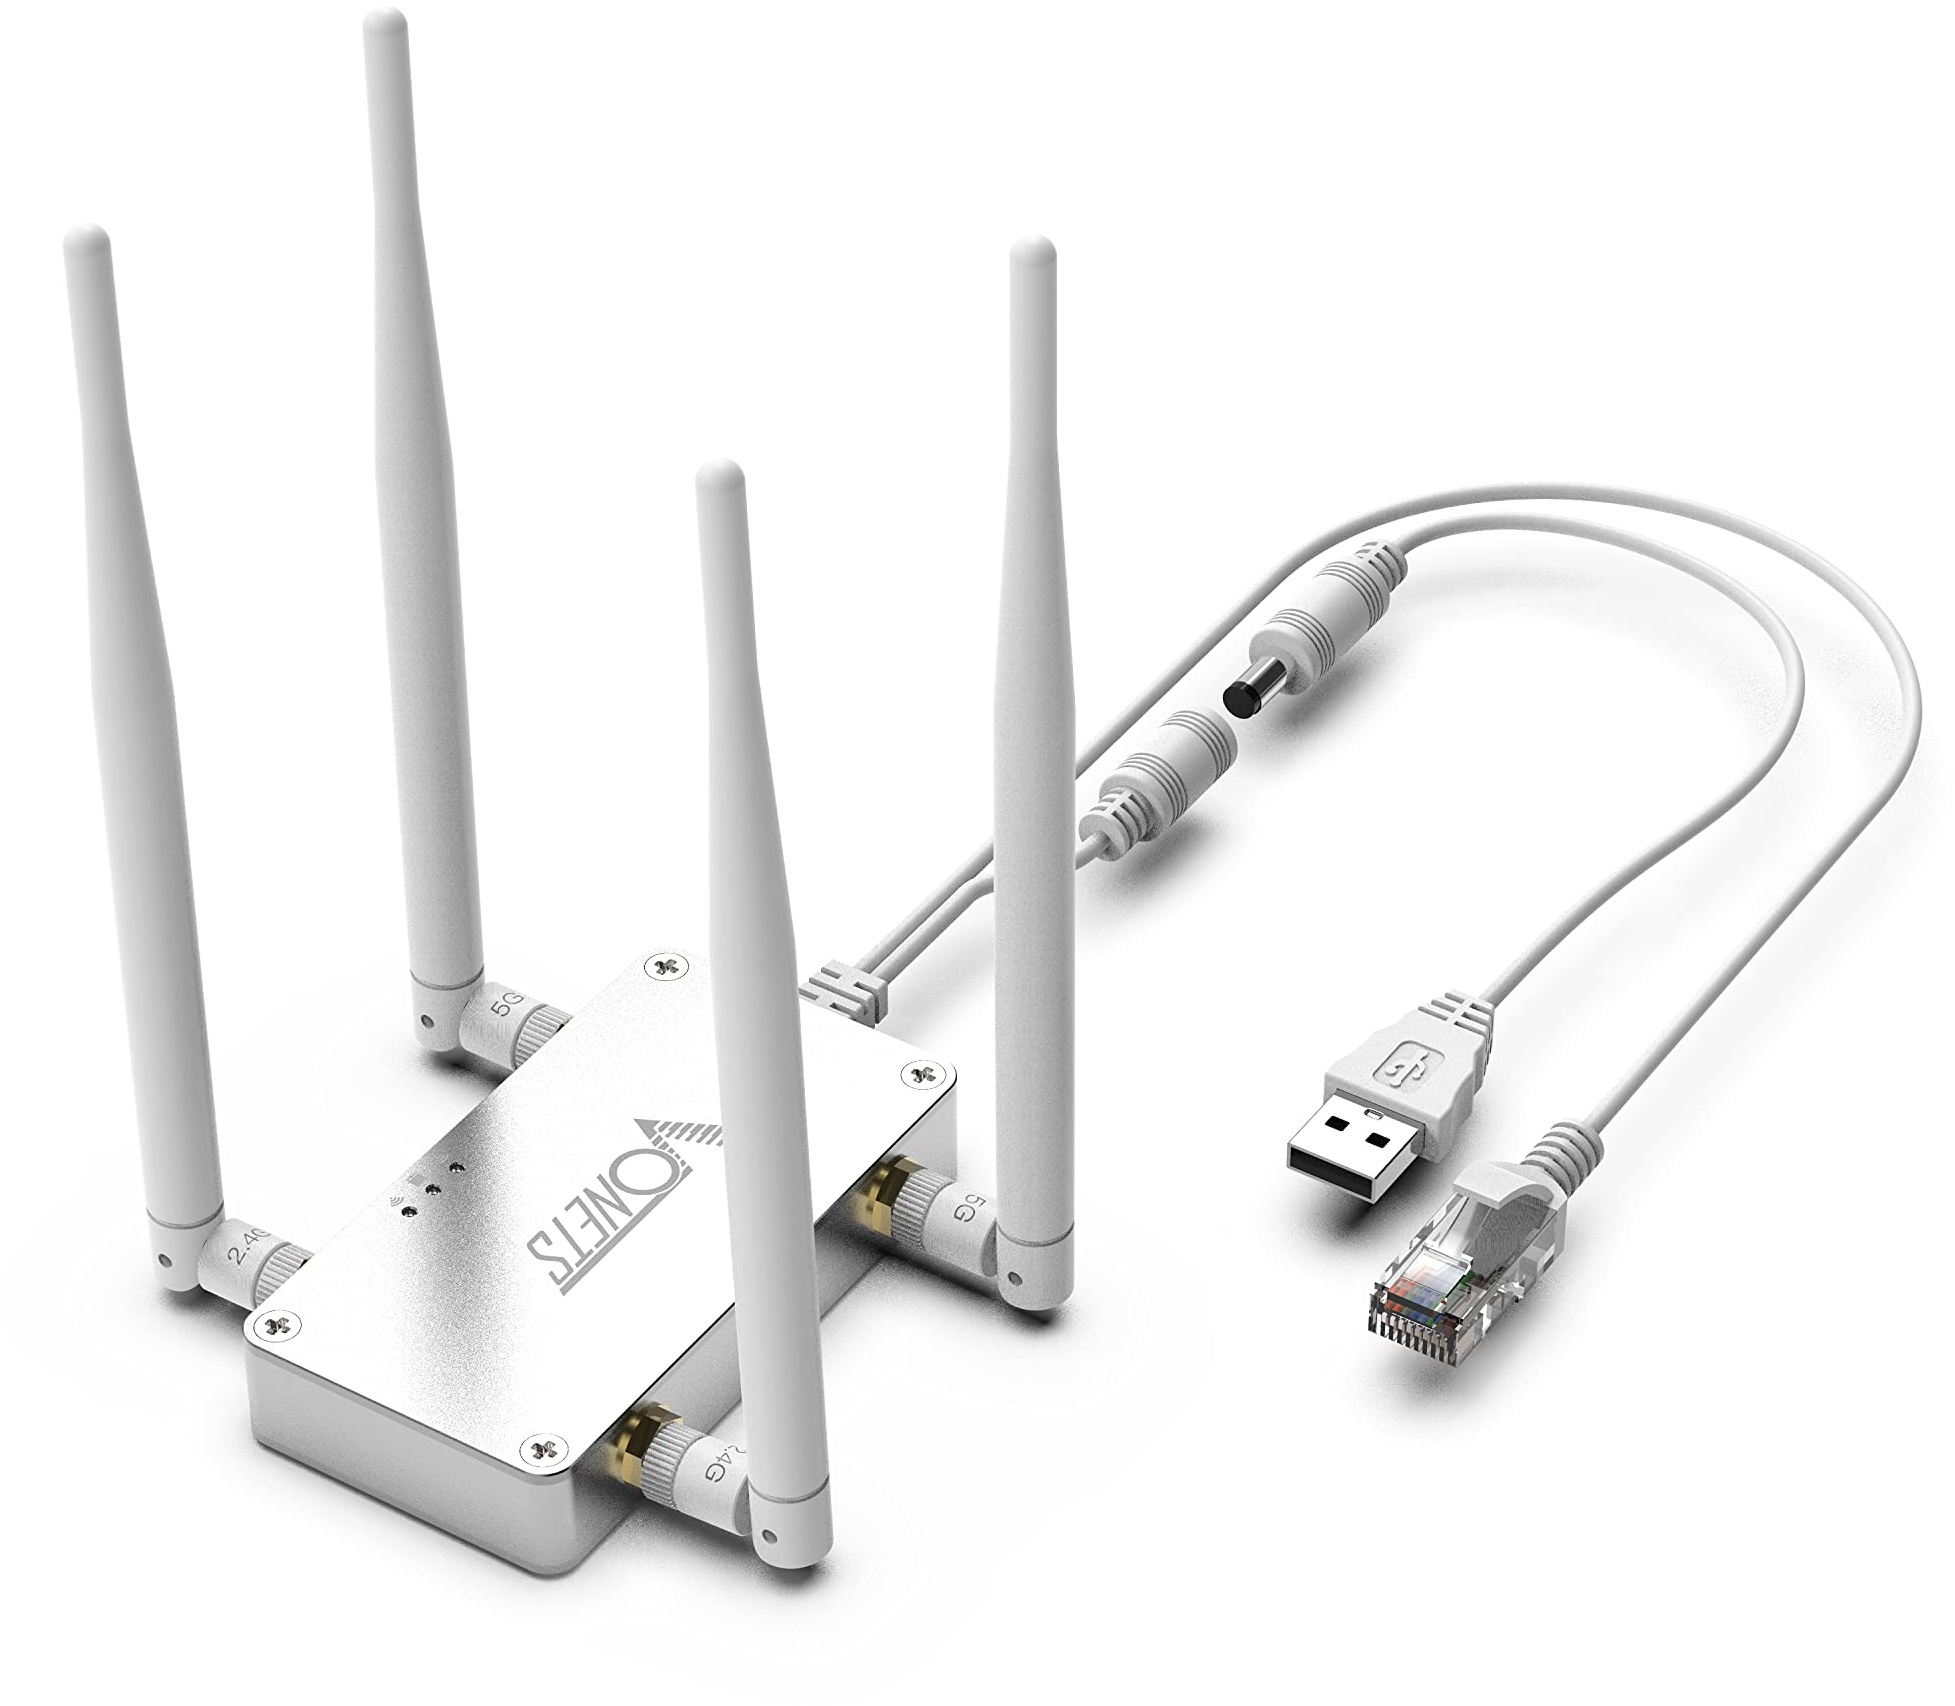 Vonets VBG1200 Industrial Dual Band 2.4GHz&5GHz WiFi Bridge High Power 1200Mbps Wireless Repeater/Router with 4 External Antennas Great Partner for Security System Electronic/Network/Medical Device